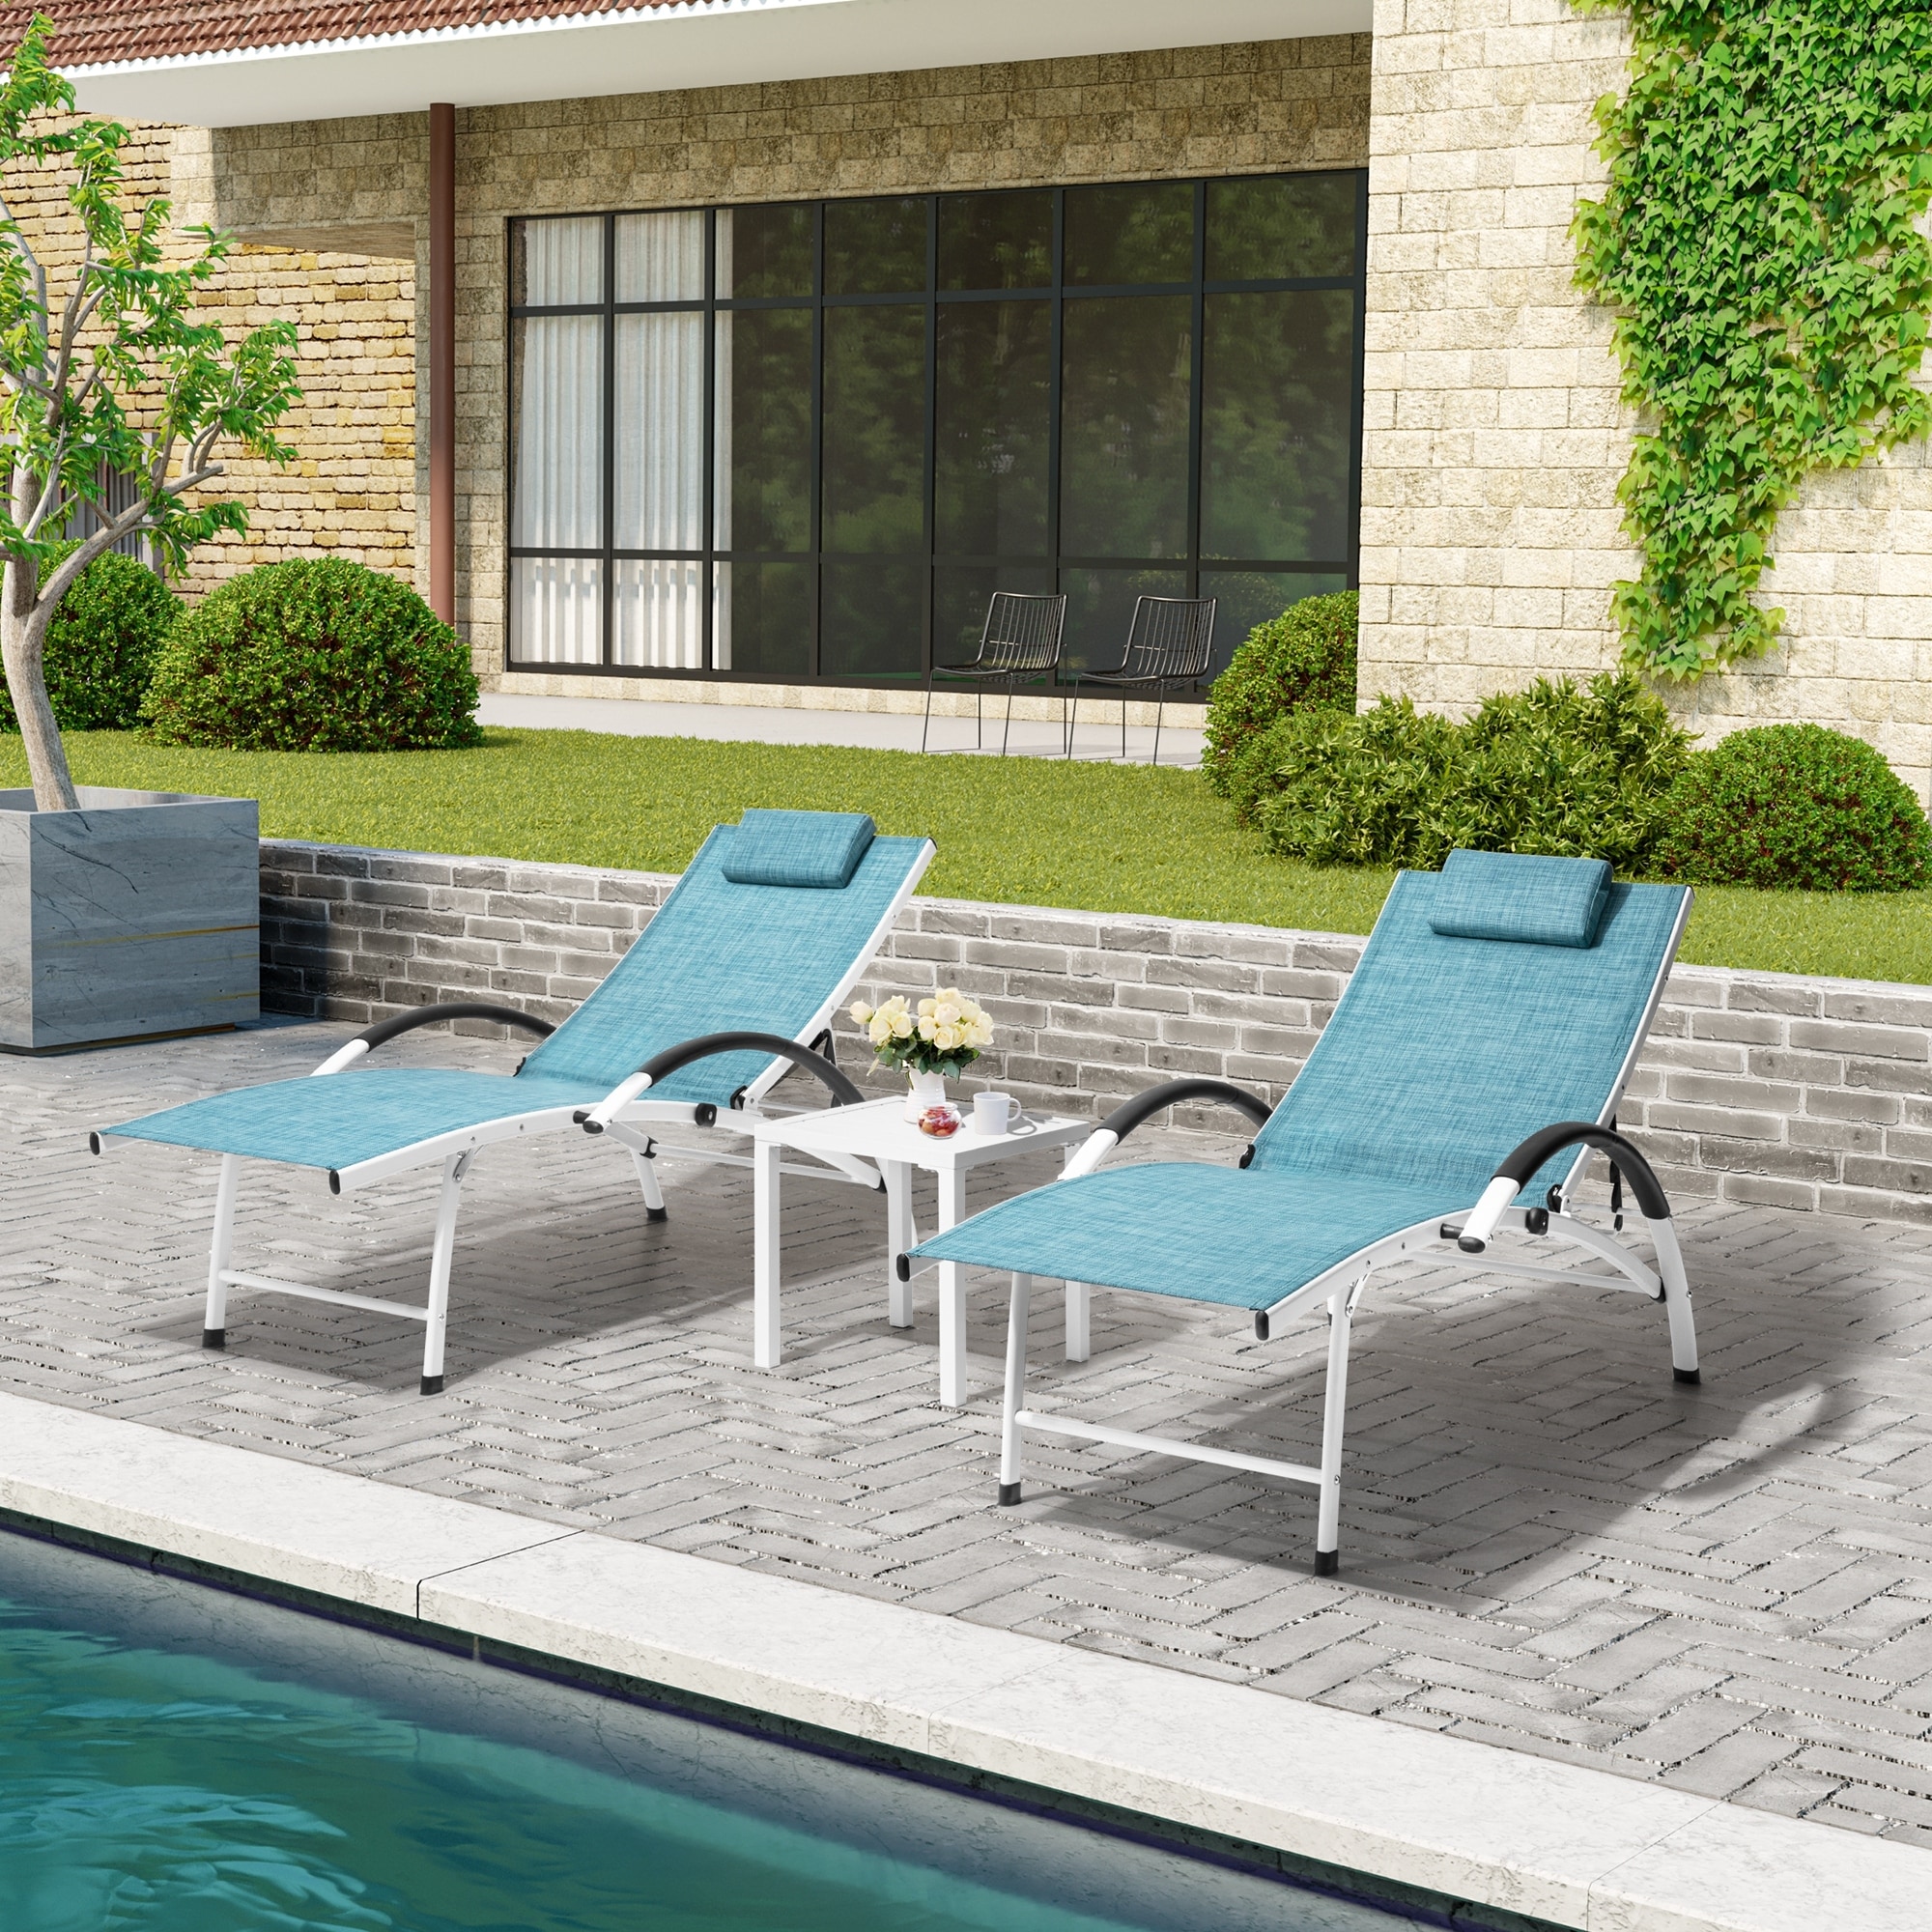 Crestlive Products Patio chaise lounge Set of 2 Aluminum Frame In